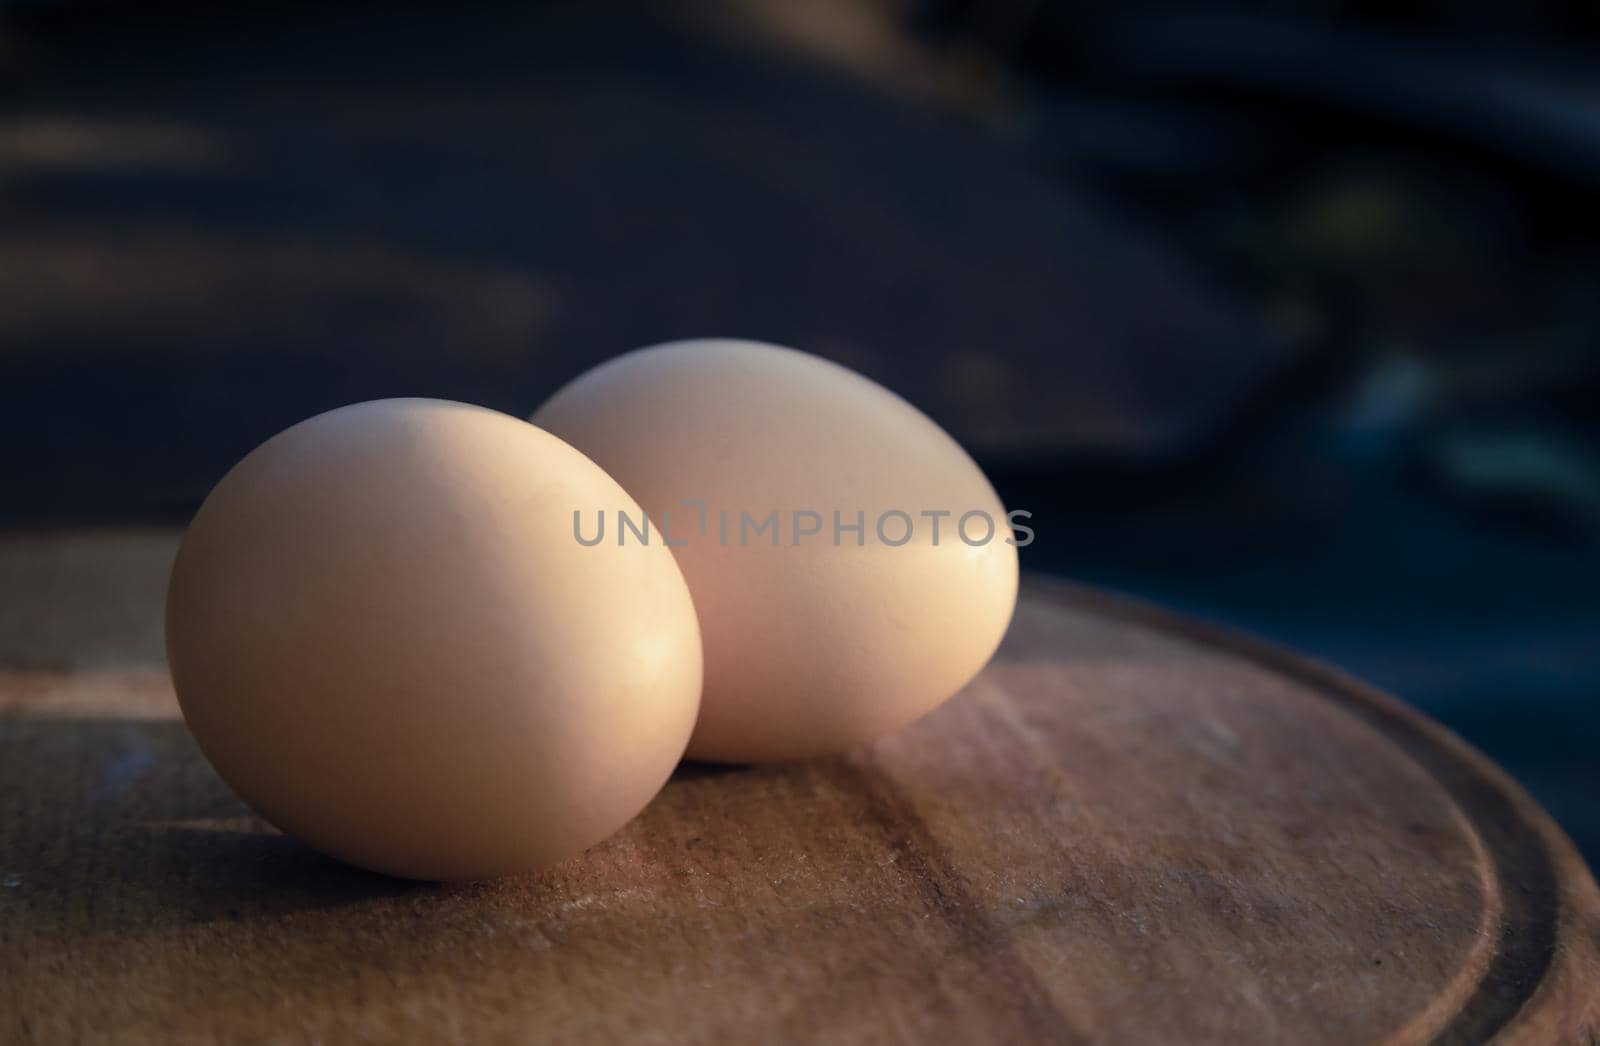 Two egg lay on the wooden table, Soft focus. Close-up two egg lay on the wooden table.